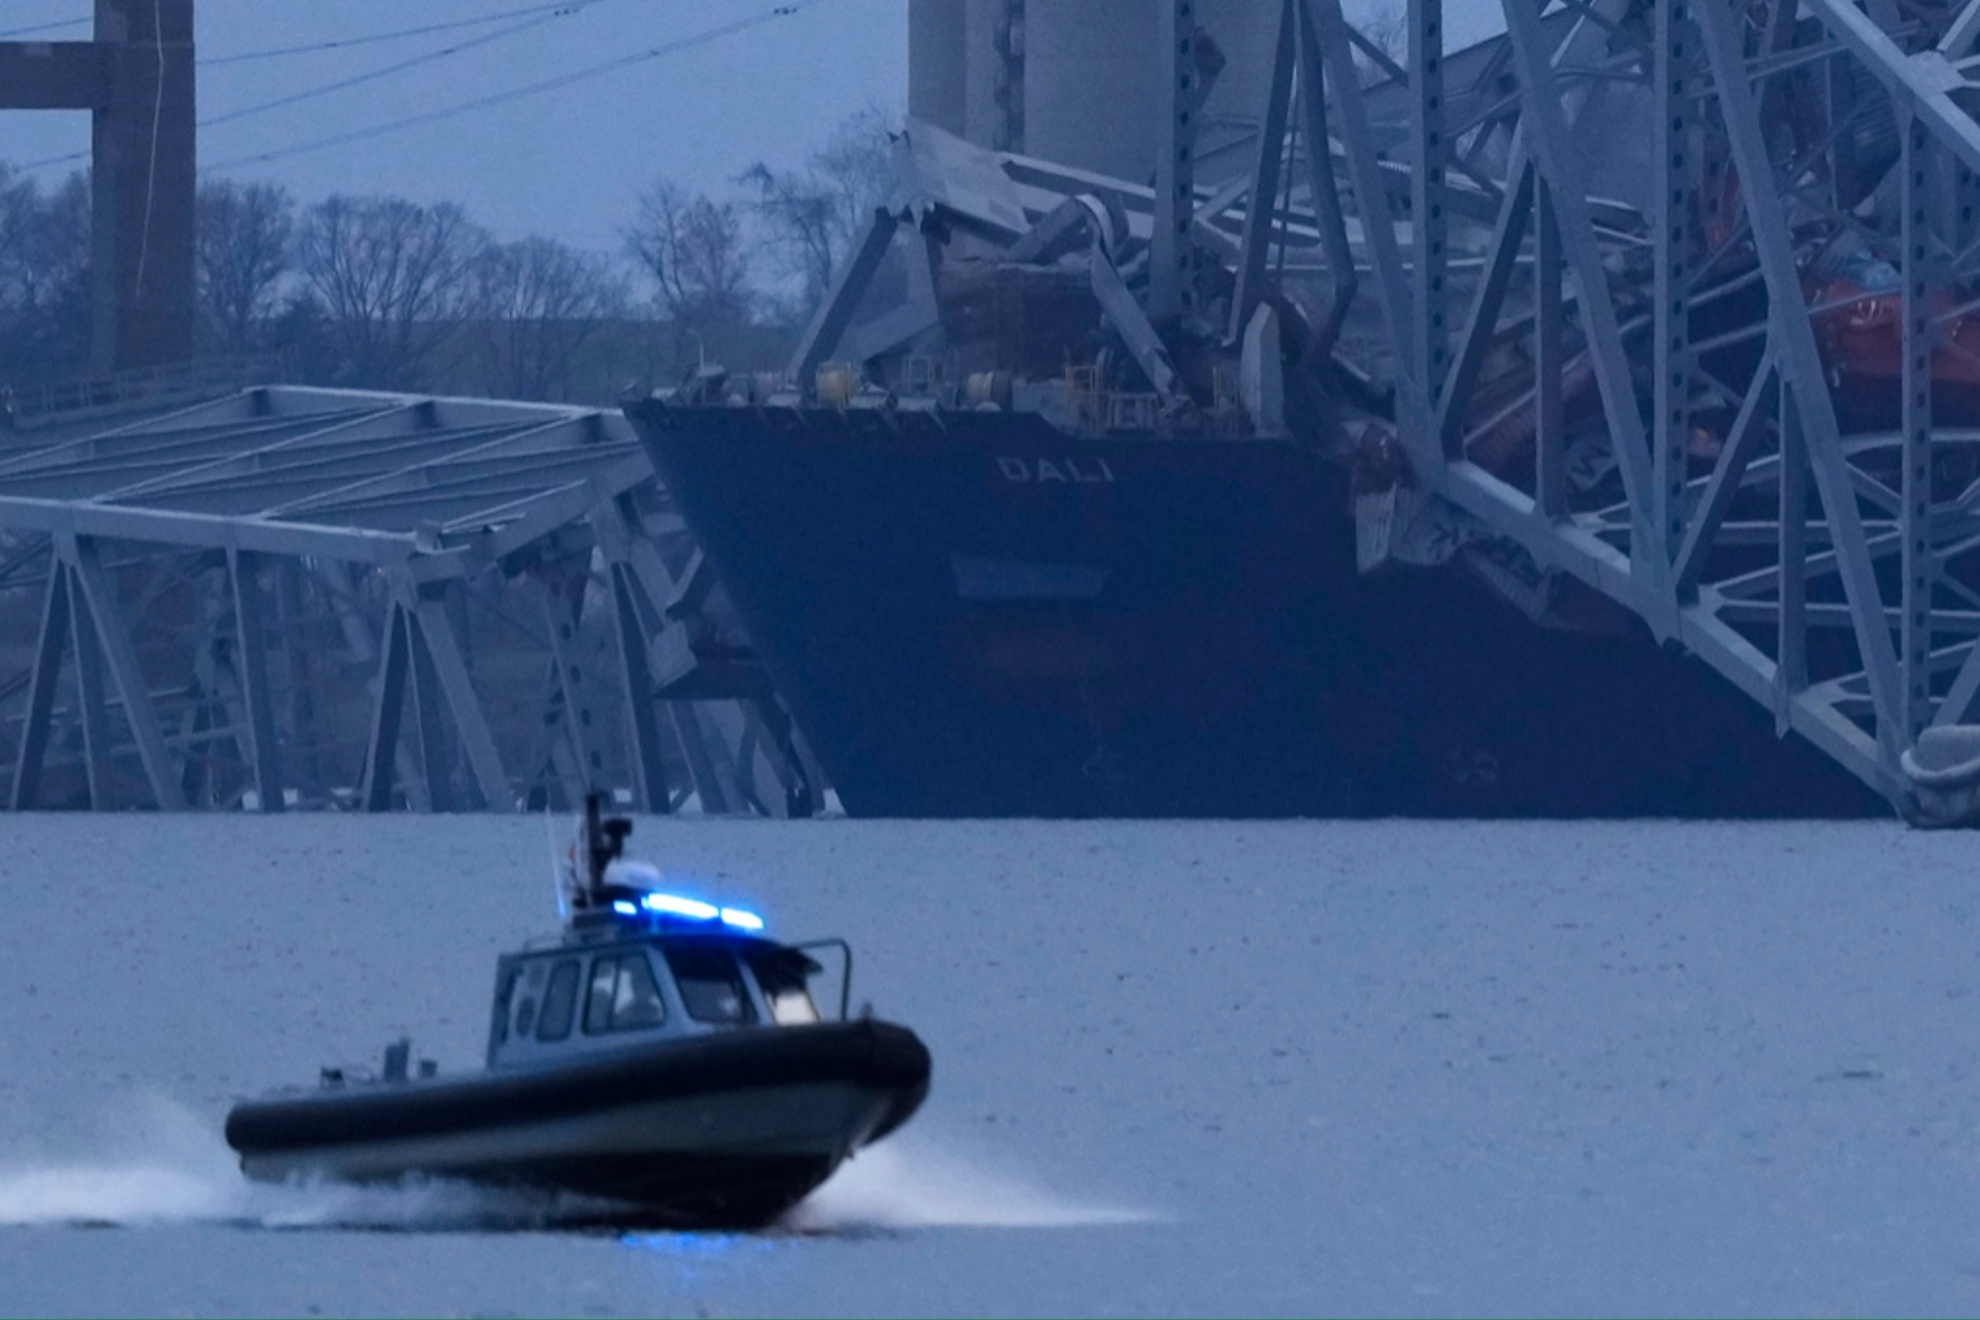 Six workers who were on the Baltimore bridge collapse have been presummed dead